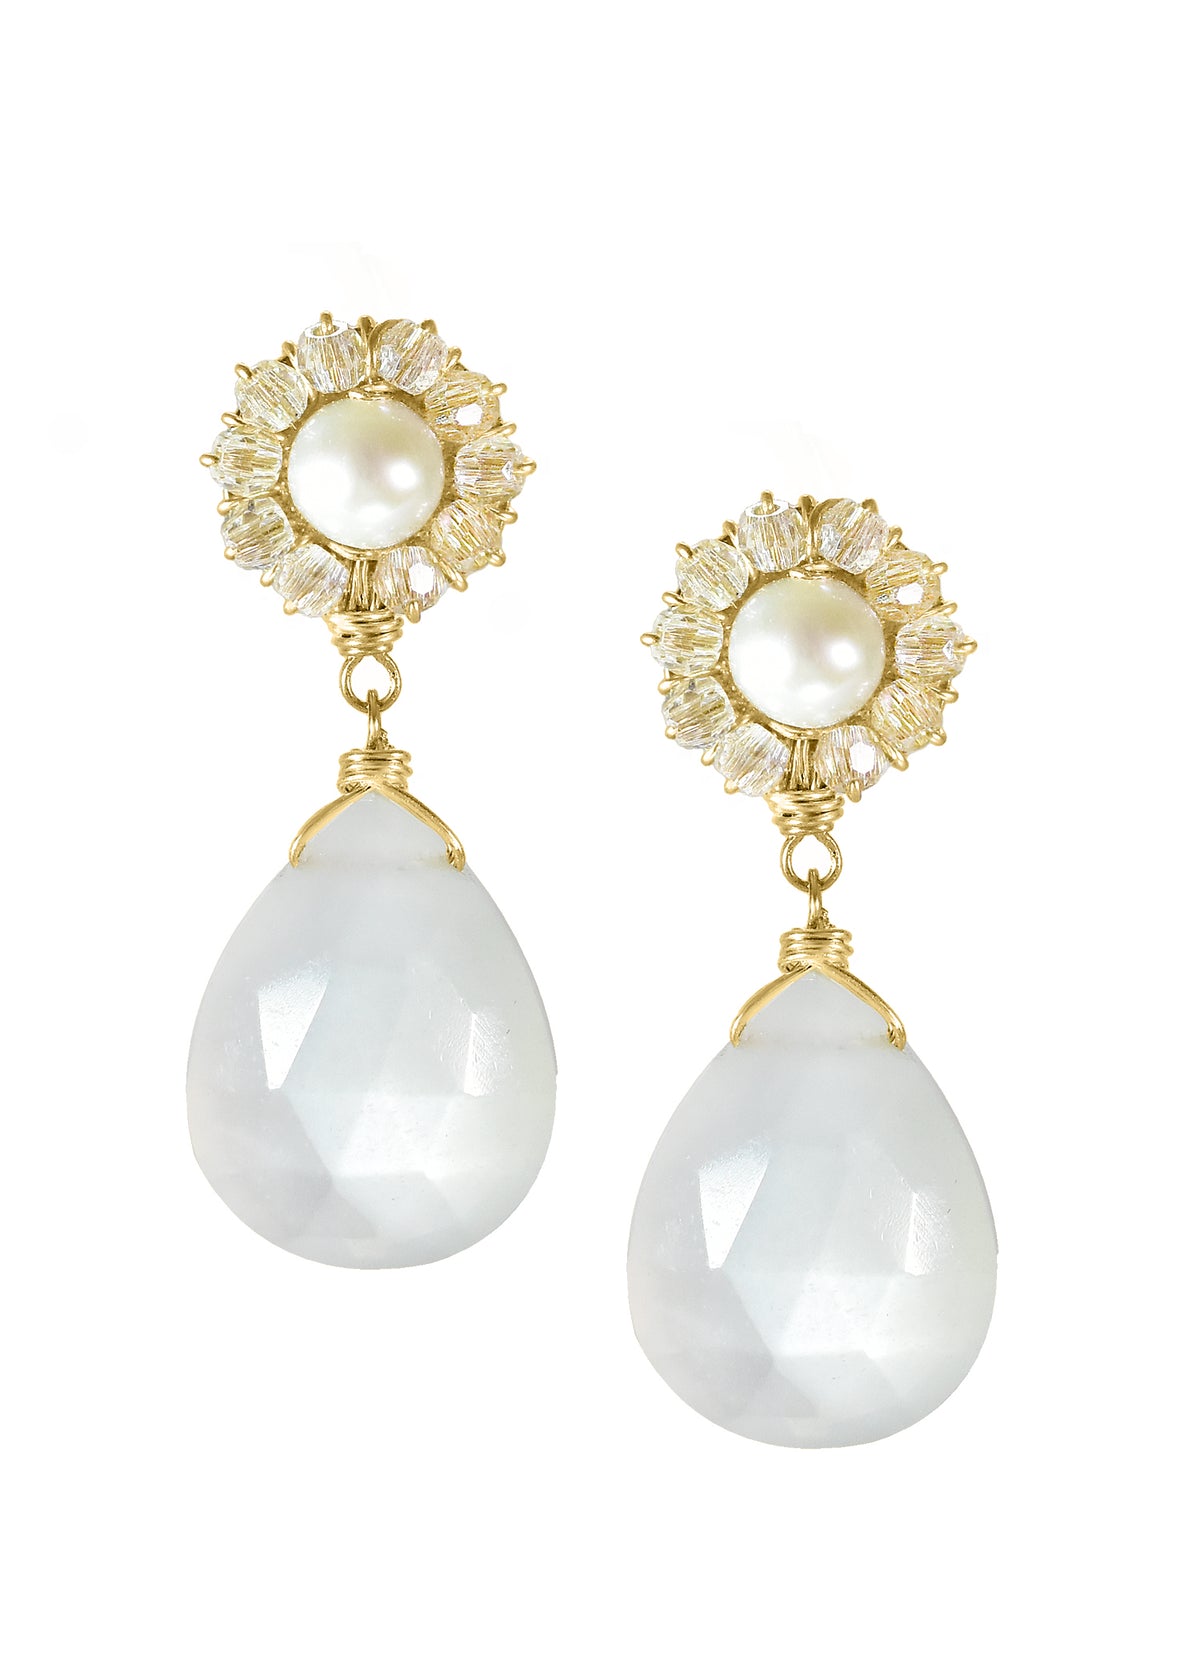 Freshwater pearl Crystal White moonstone 14k gold fill Earrings measure 1&quot; in length (including the posts) and 3/8&quot; in width at the widest point. Posts measure 1/4&quot; in diameter Handmade in our Los Angeles studio